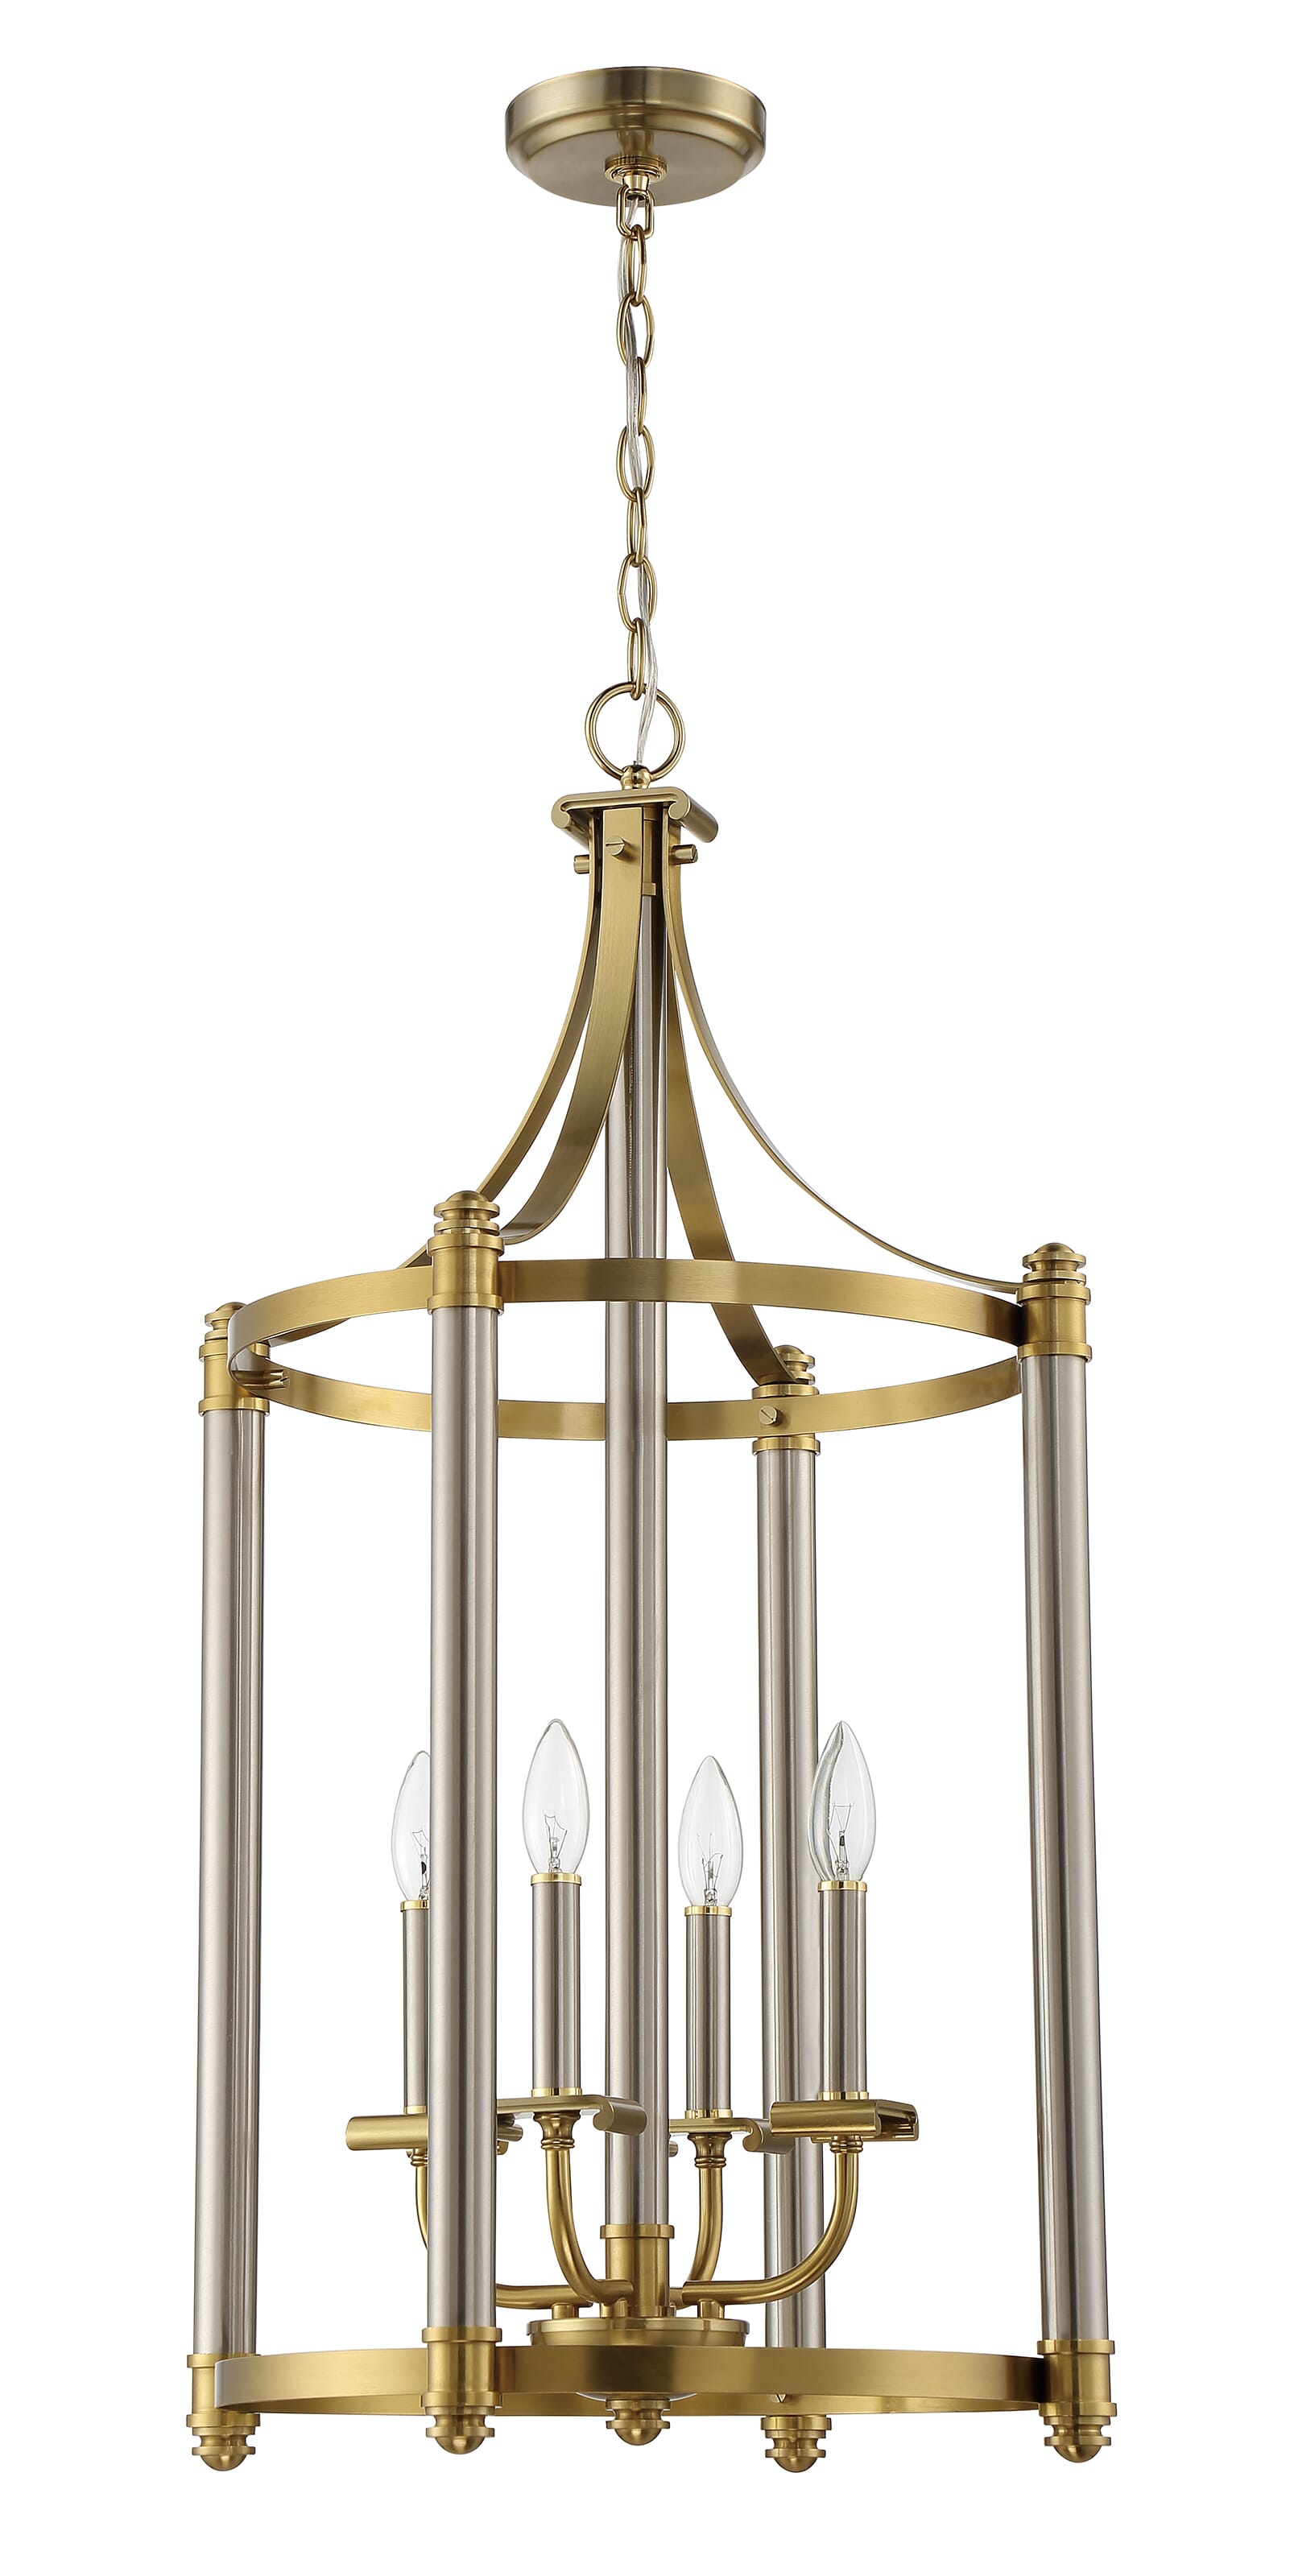 Stanza 4-Light Foyer Light in Brushed Polished Nickel with Satin Brass